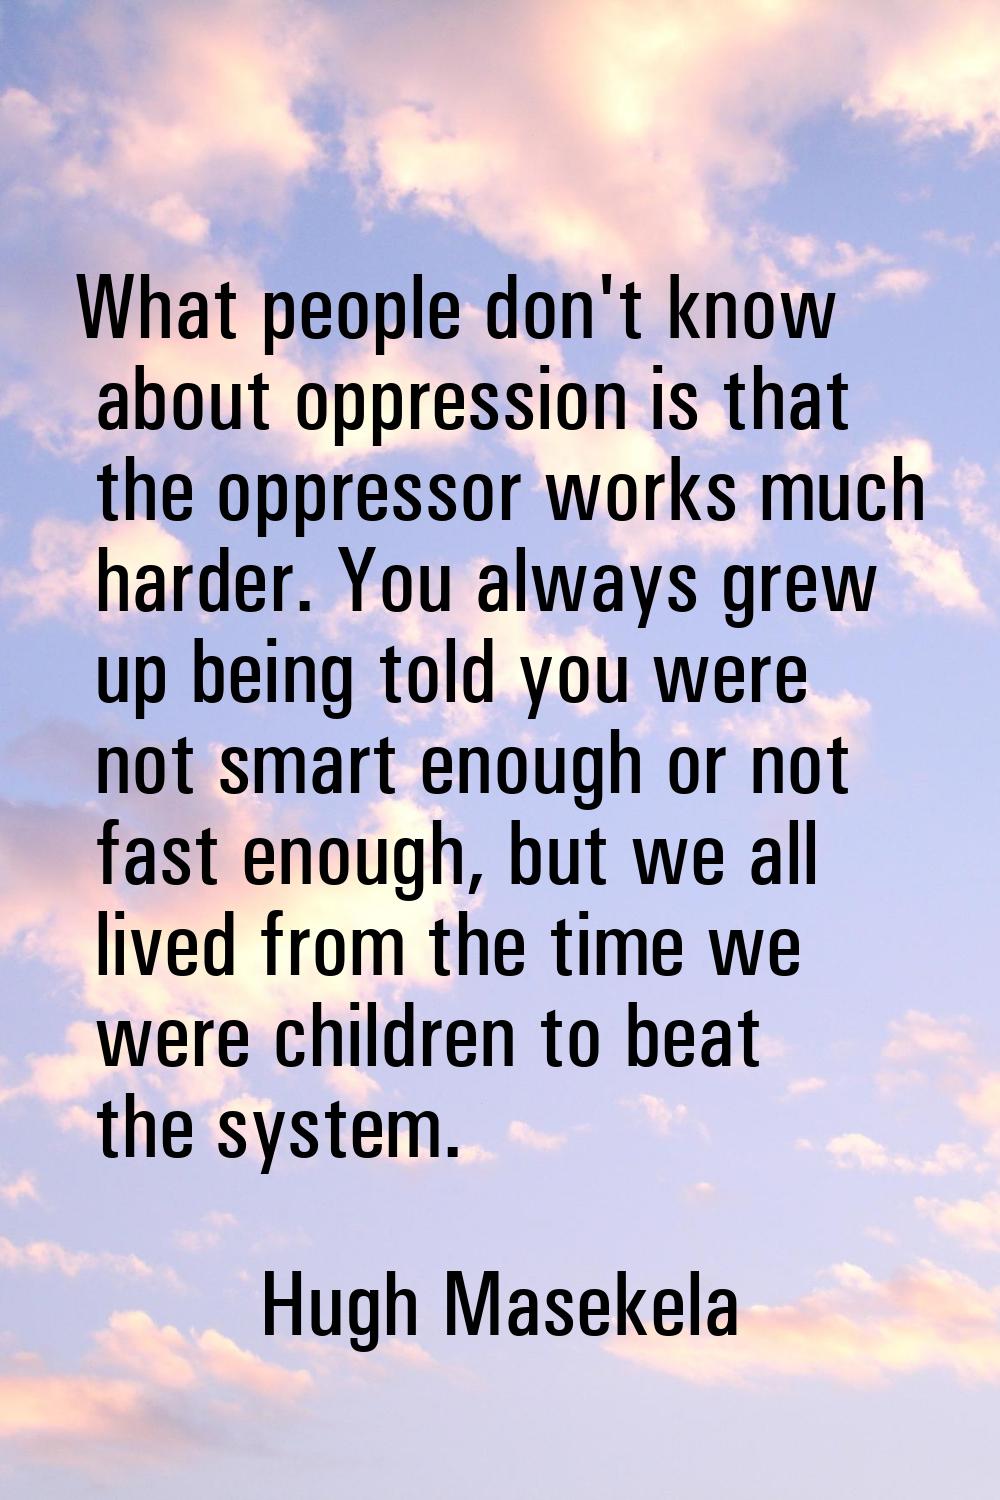 What people don't know about oppression is that the oppressor works much harder. You always grew up